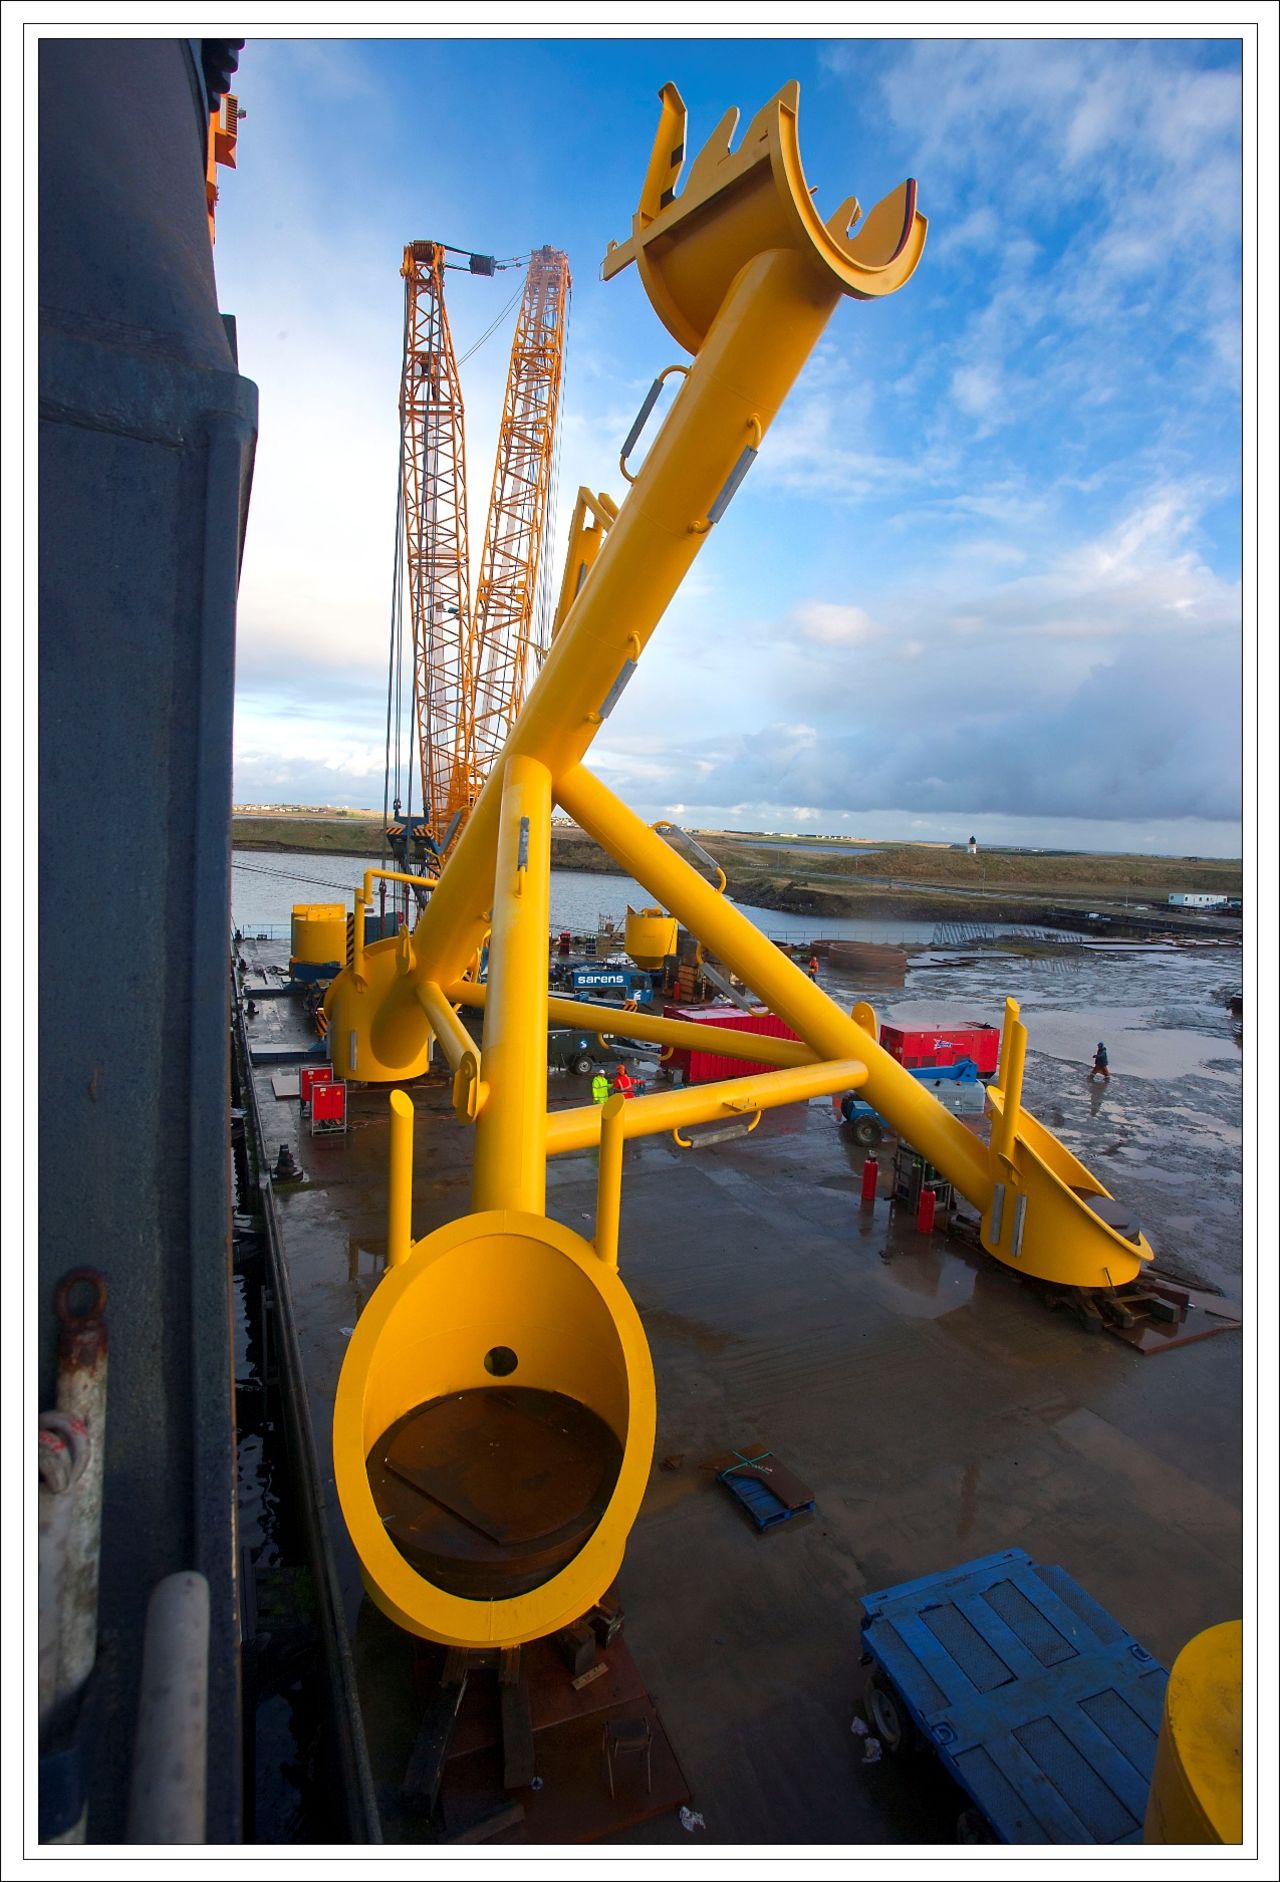 The device is over 30-meters-tall and is mounted to the seabed by a giant steel support structure.